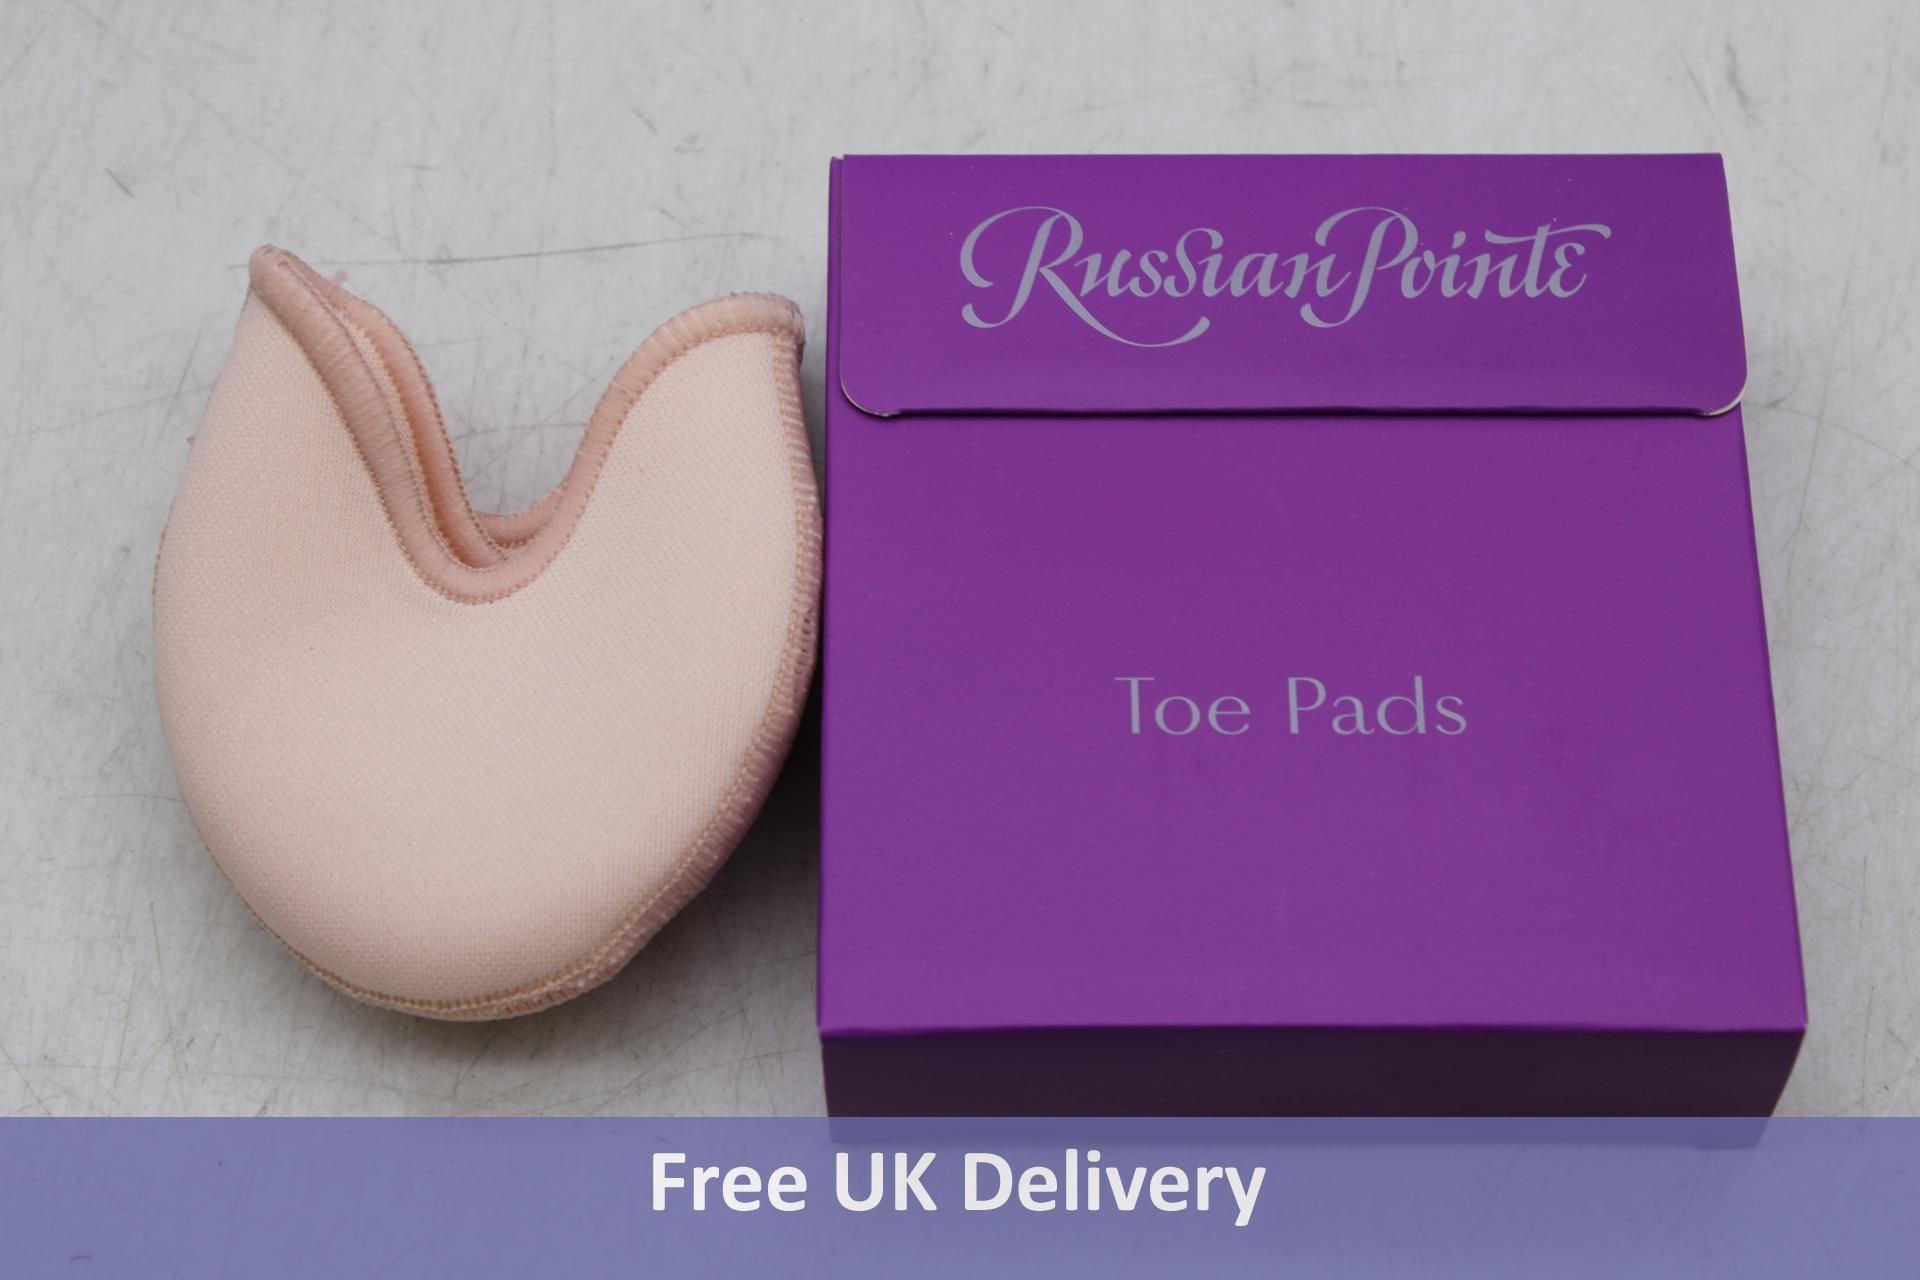 Five Russian Pointe Toe Pads, Light Pink, Size S